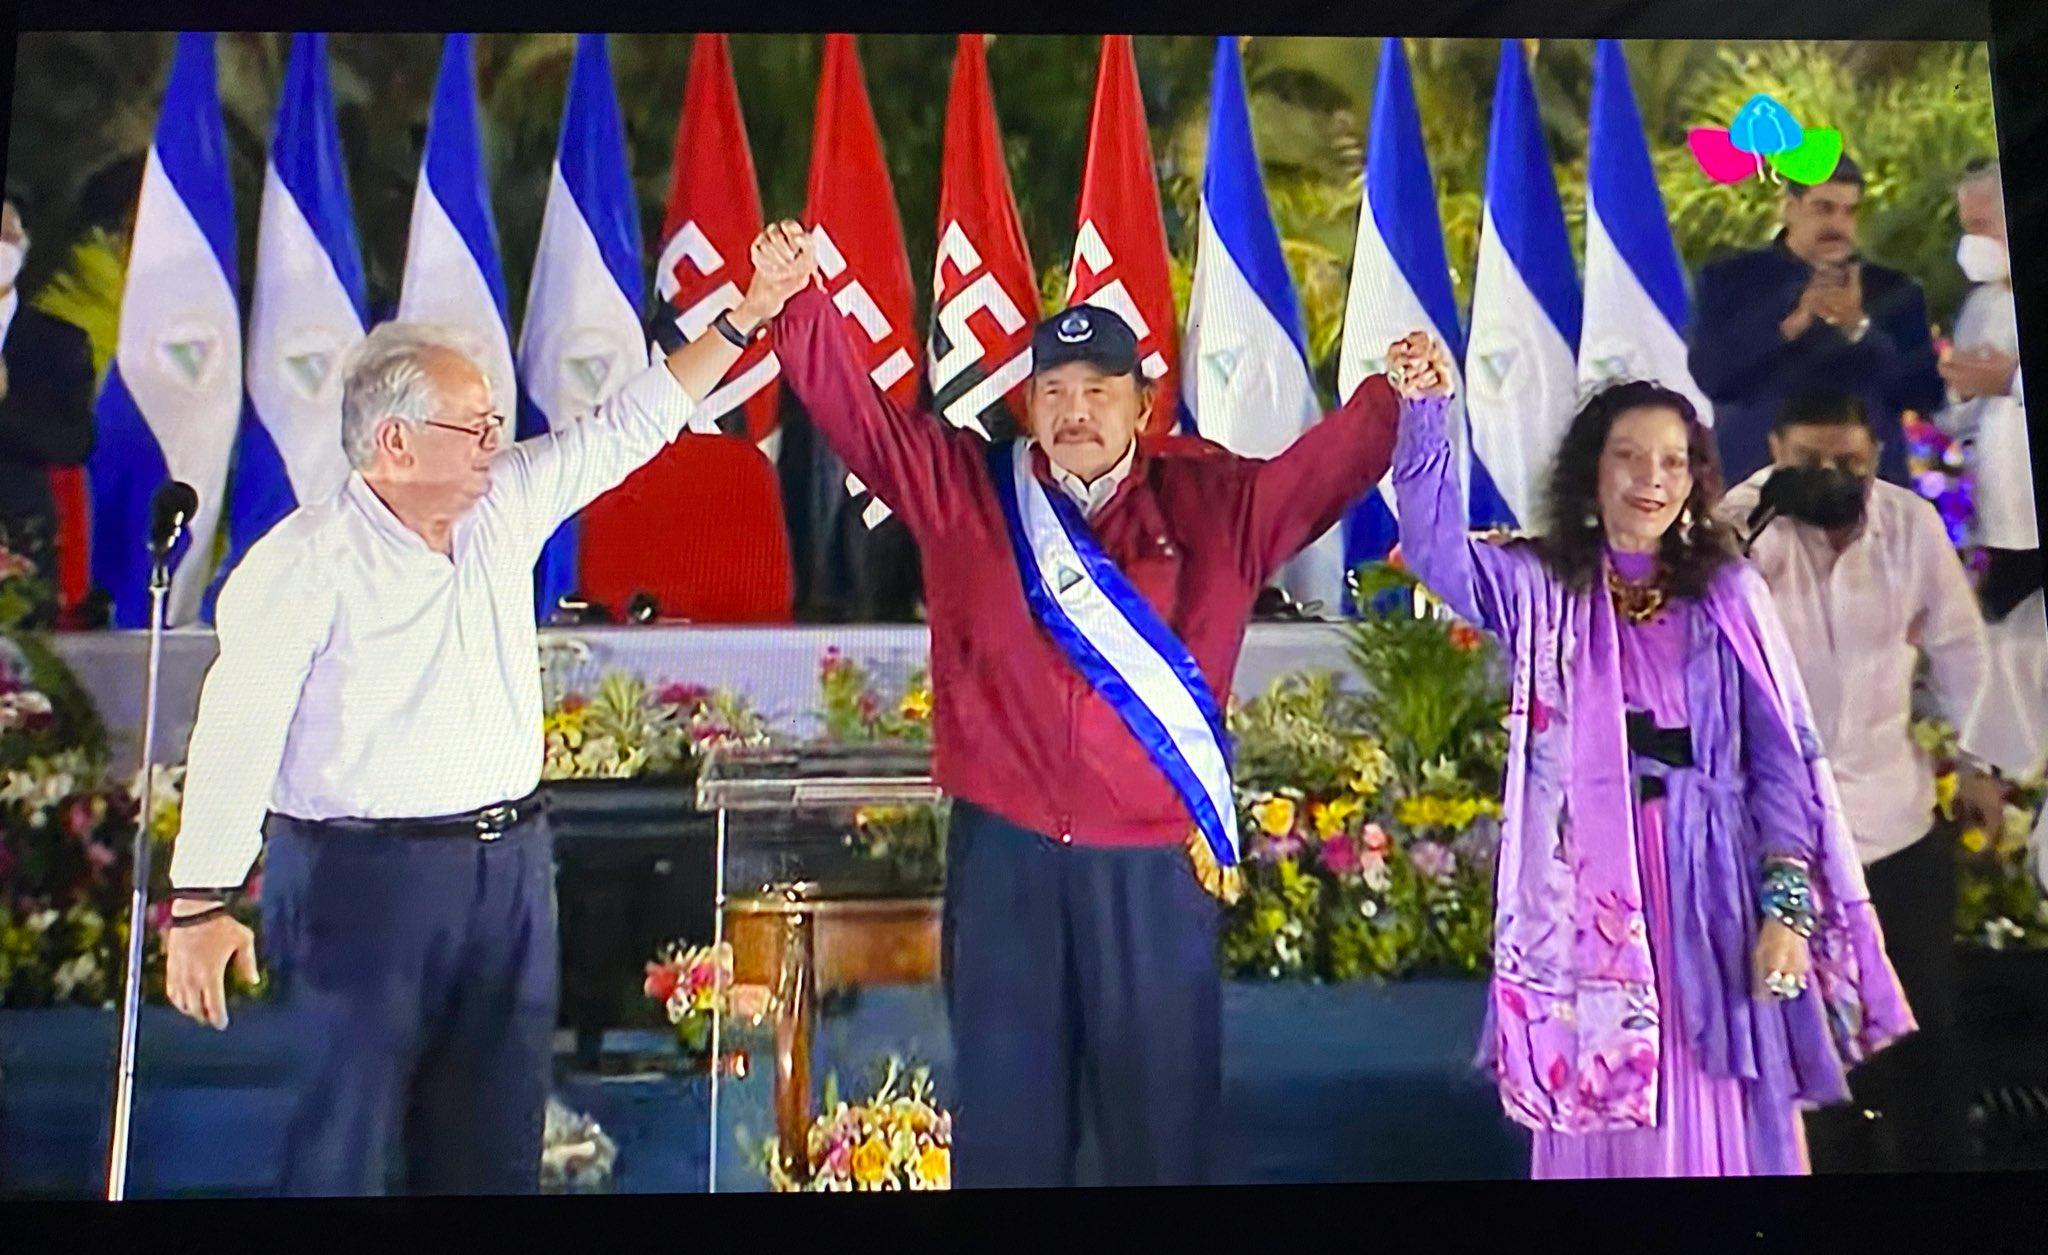 Ortega (foreground, middle) and Murillo (right) at their inauguration on Jan. 10, 2022. In the background, Nicolás Maduro (black) speaks with Miguel Díaz-Canel. Photo: State-run Channel 4 via Divergentes